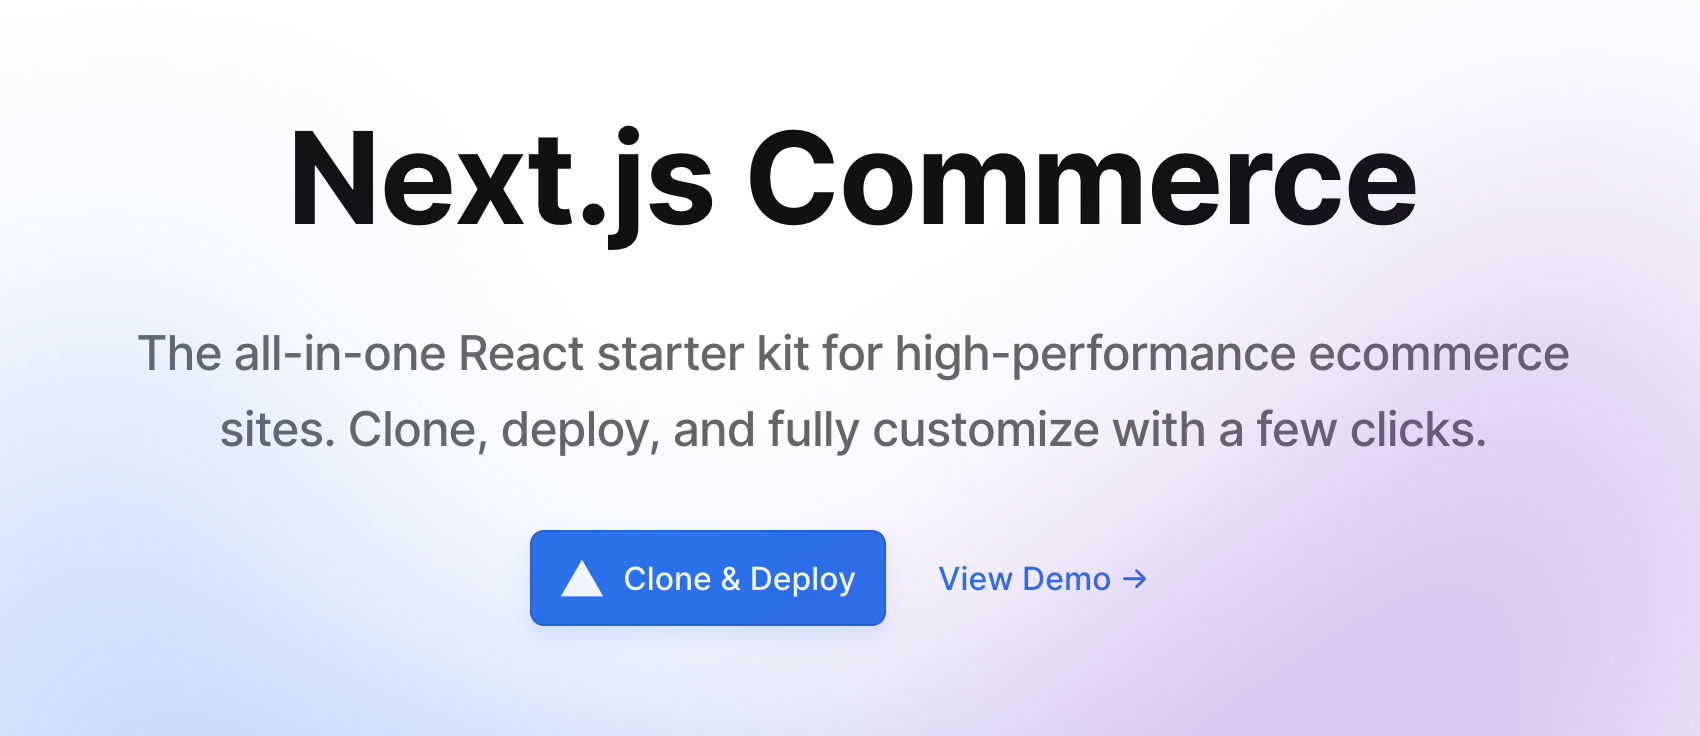 Clone and deploy Next.js Commerce